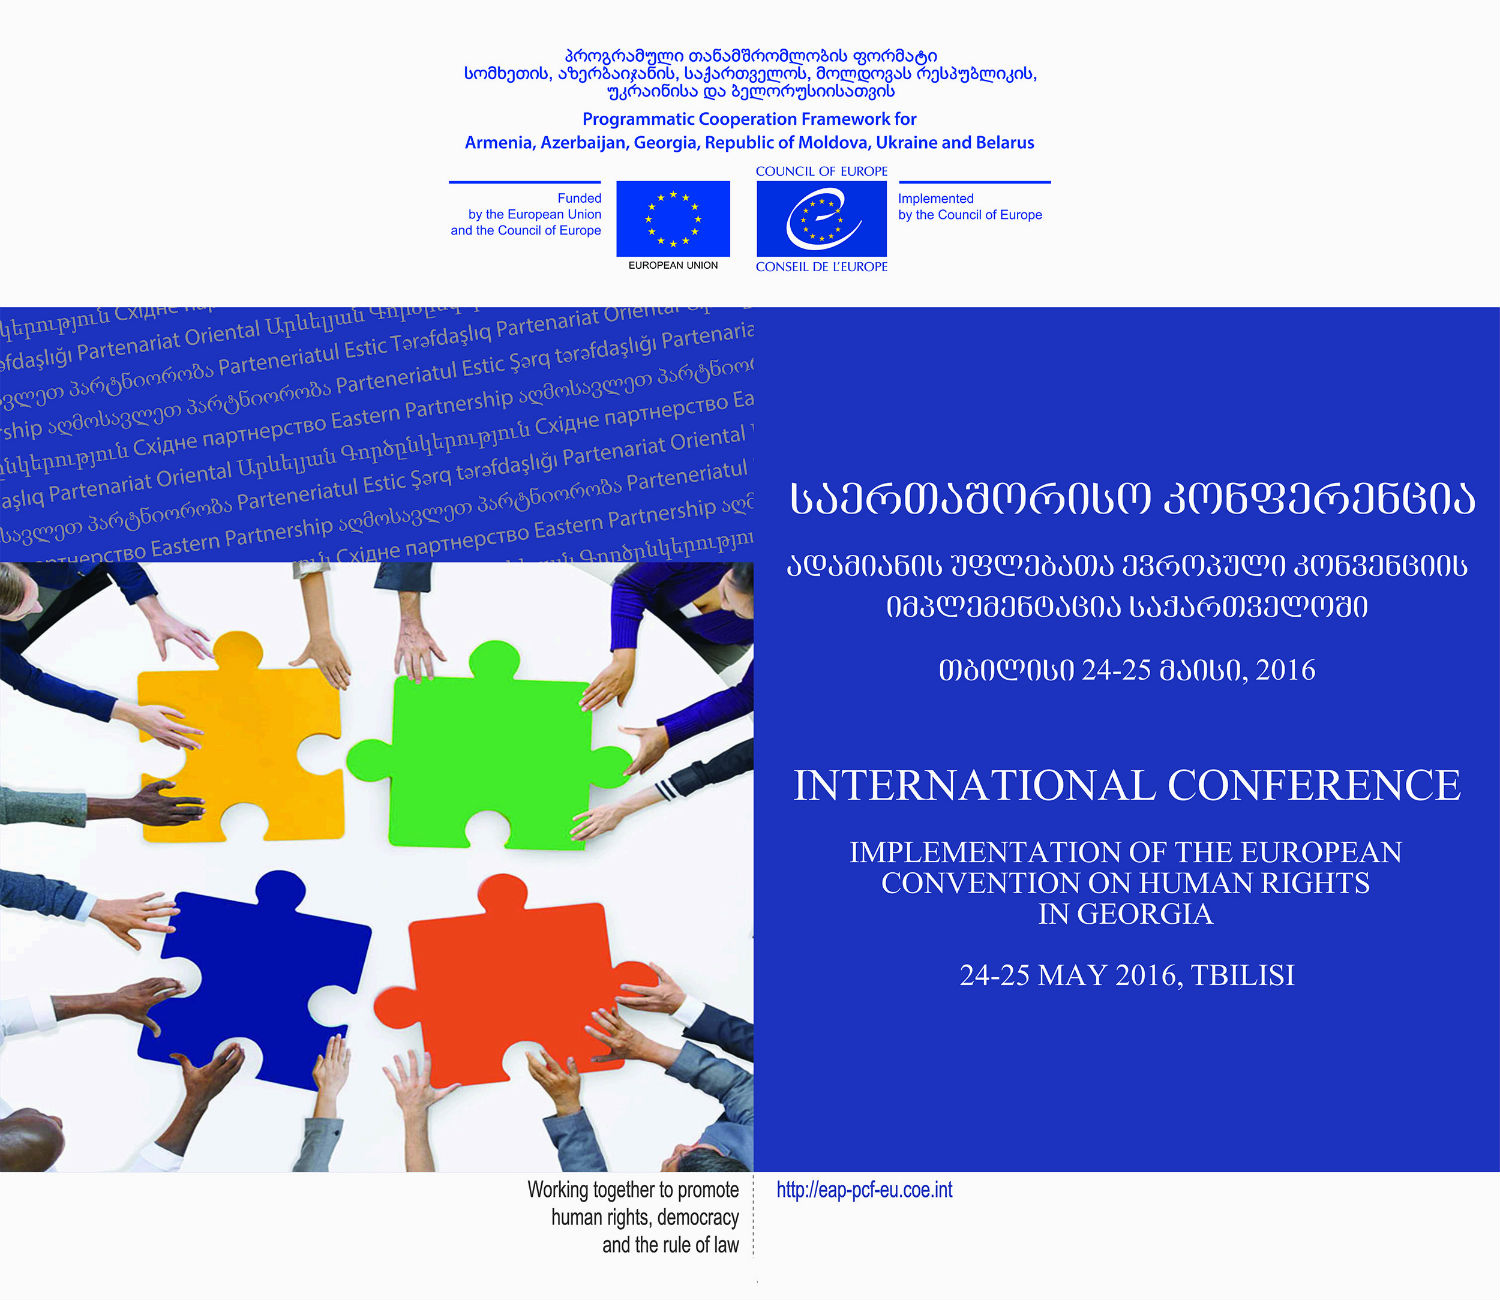 Implementation of the European Convention on Human Rights in Georgia